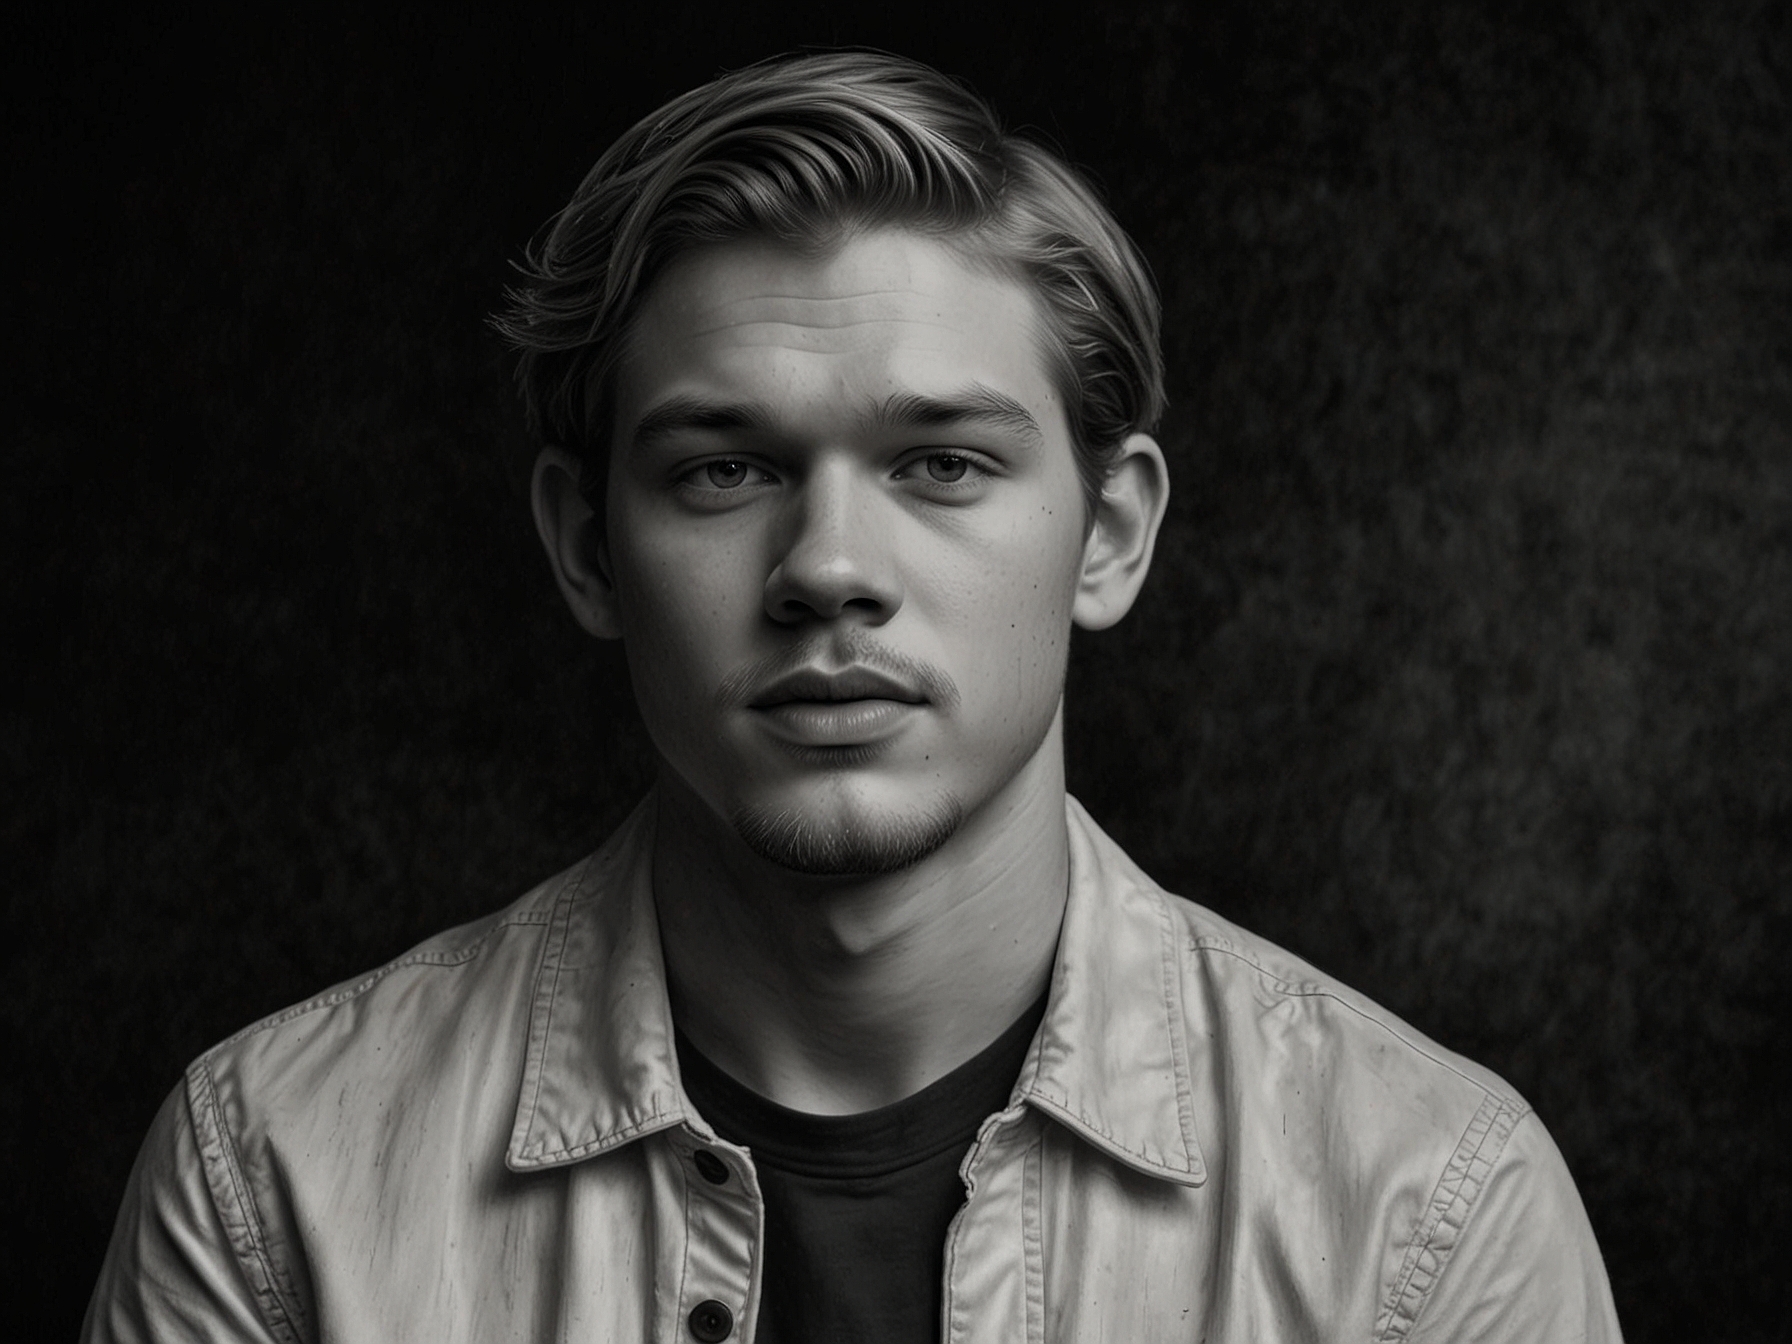 Joe Alwyn speaks candidly in an interview, reflecting on his emotional journey post-breakup with Taylor Swift, emphasizing the difficulty of navigating personal feelings amidst public scrutiny.